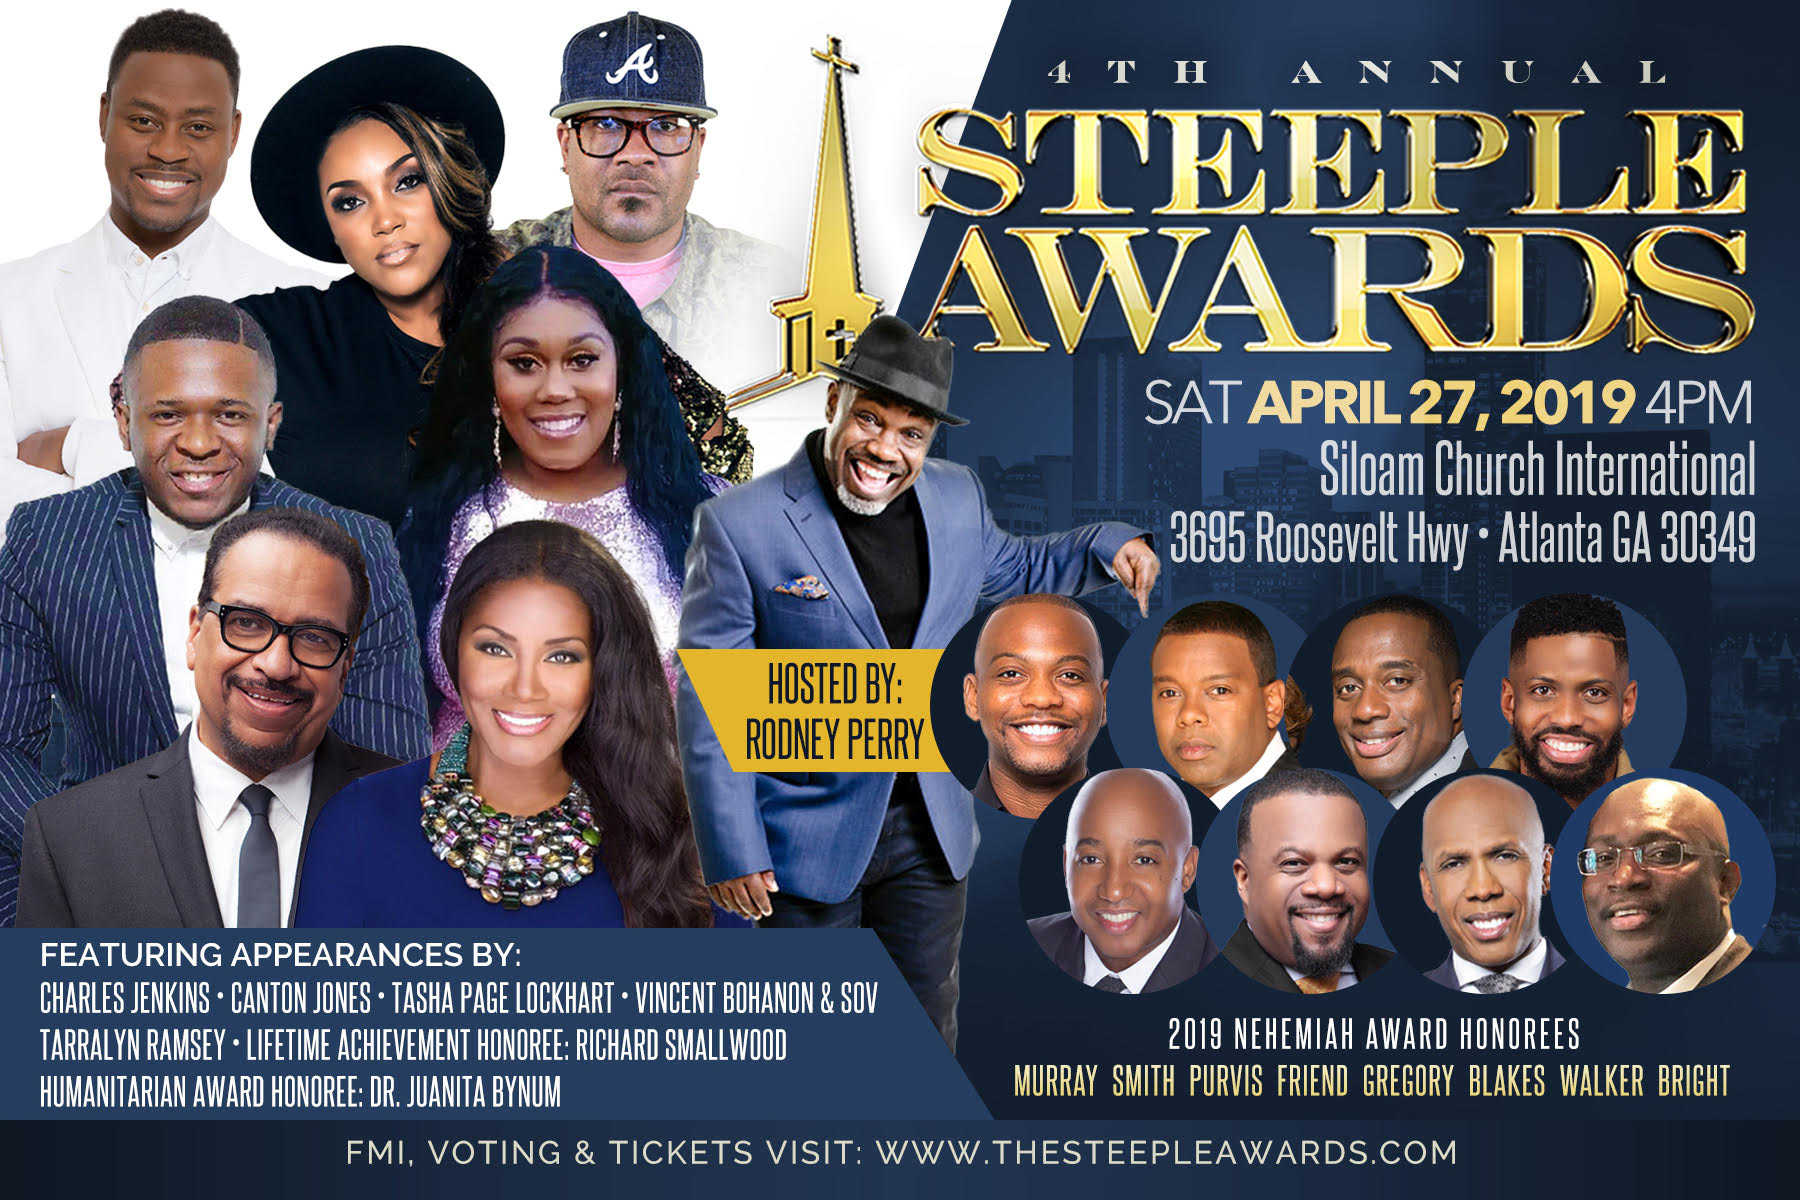 4th Annual Steeple Awards to be Held in South Fulton